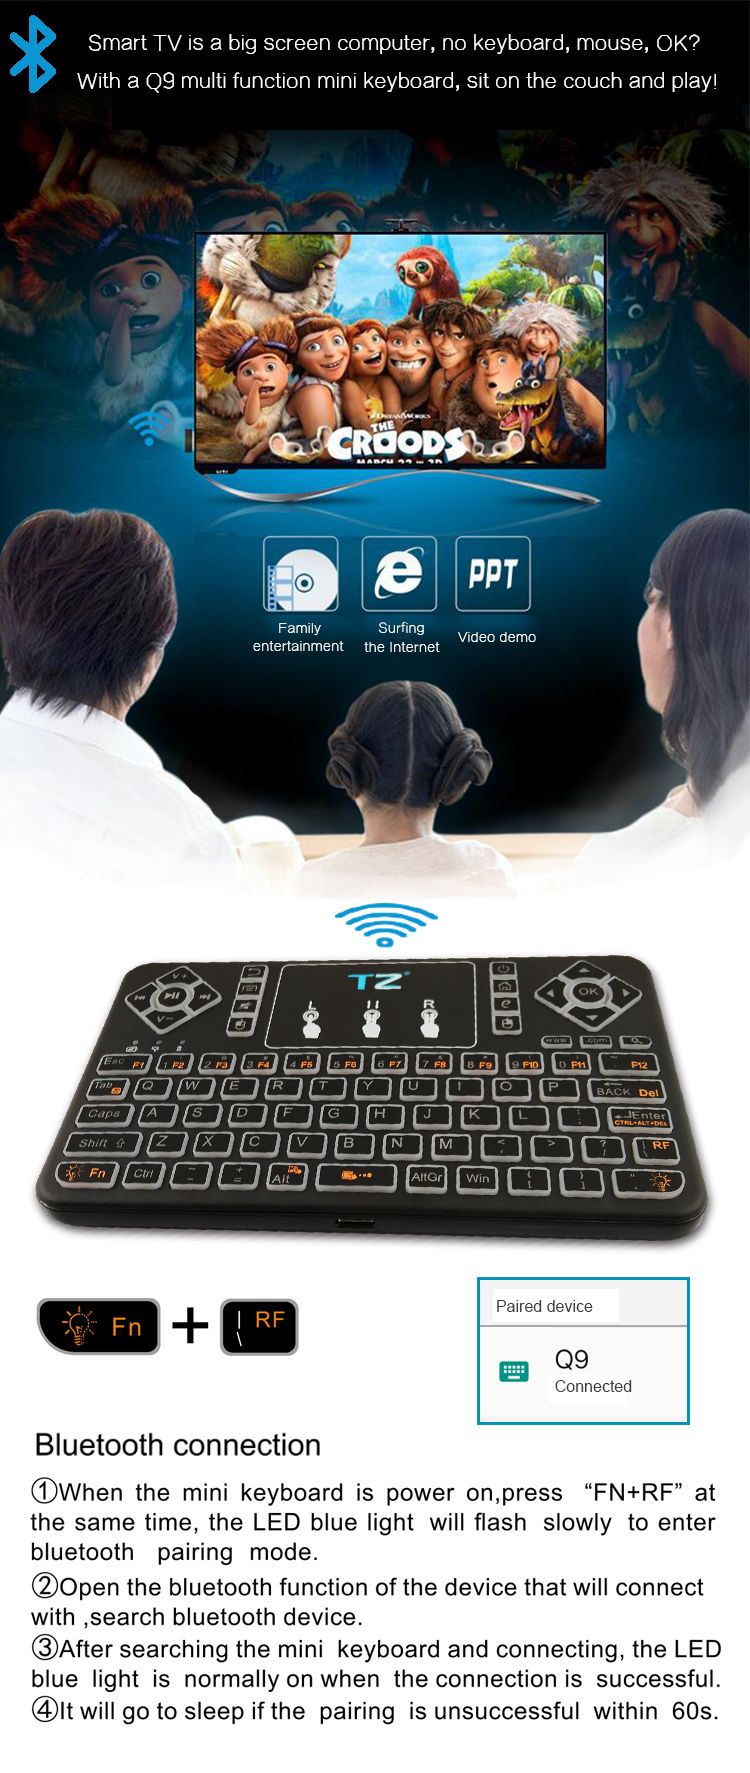 Q9-bluetooth-Wireless-3-Colors-Backlit-Touchpad-Air-Mouse-Mini-Keyboard-for-Android-TV-Box-Phone-1183401